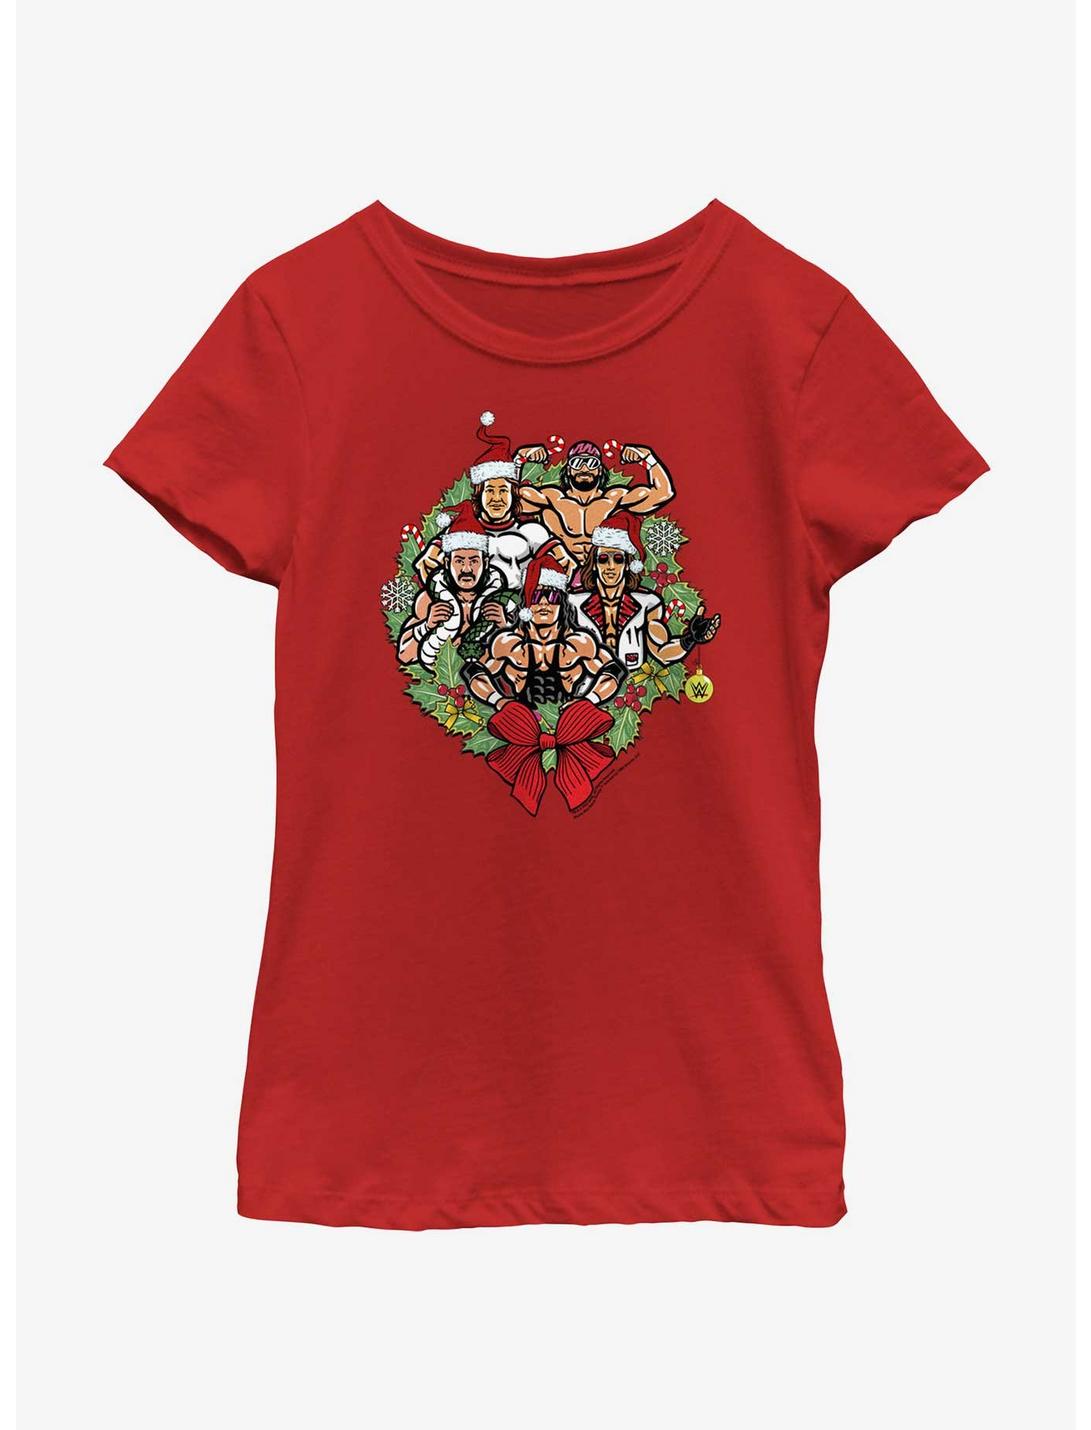 WWE Holiday Legends Wreath Youth Girls T-Shirt, RED, hi-res